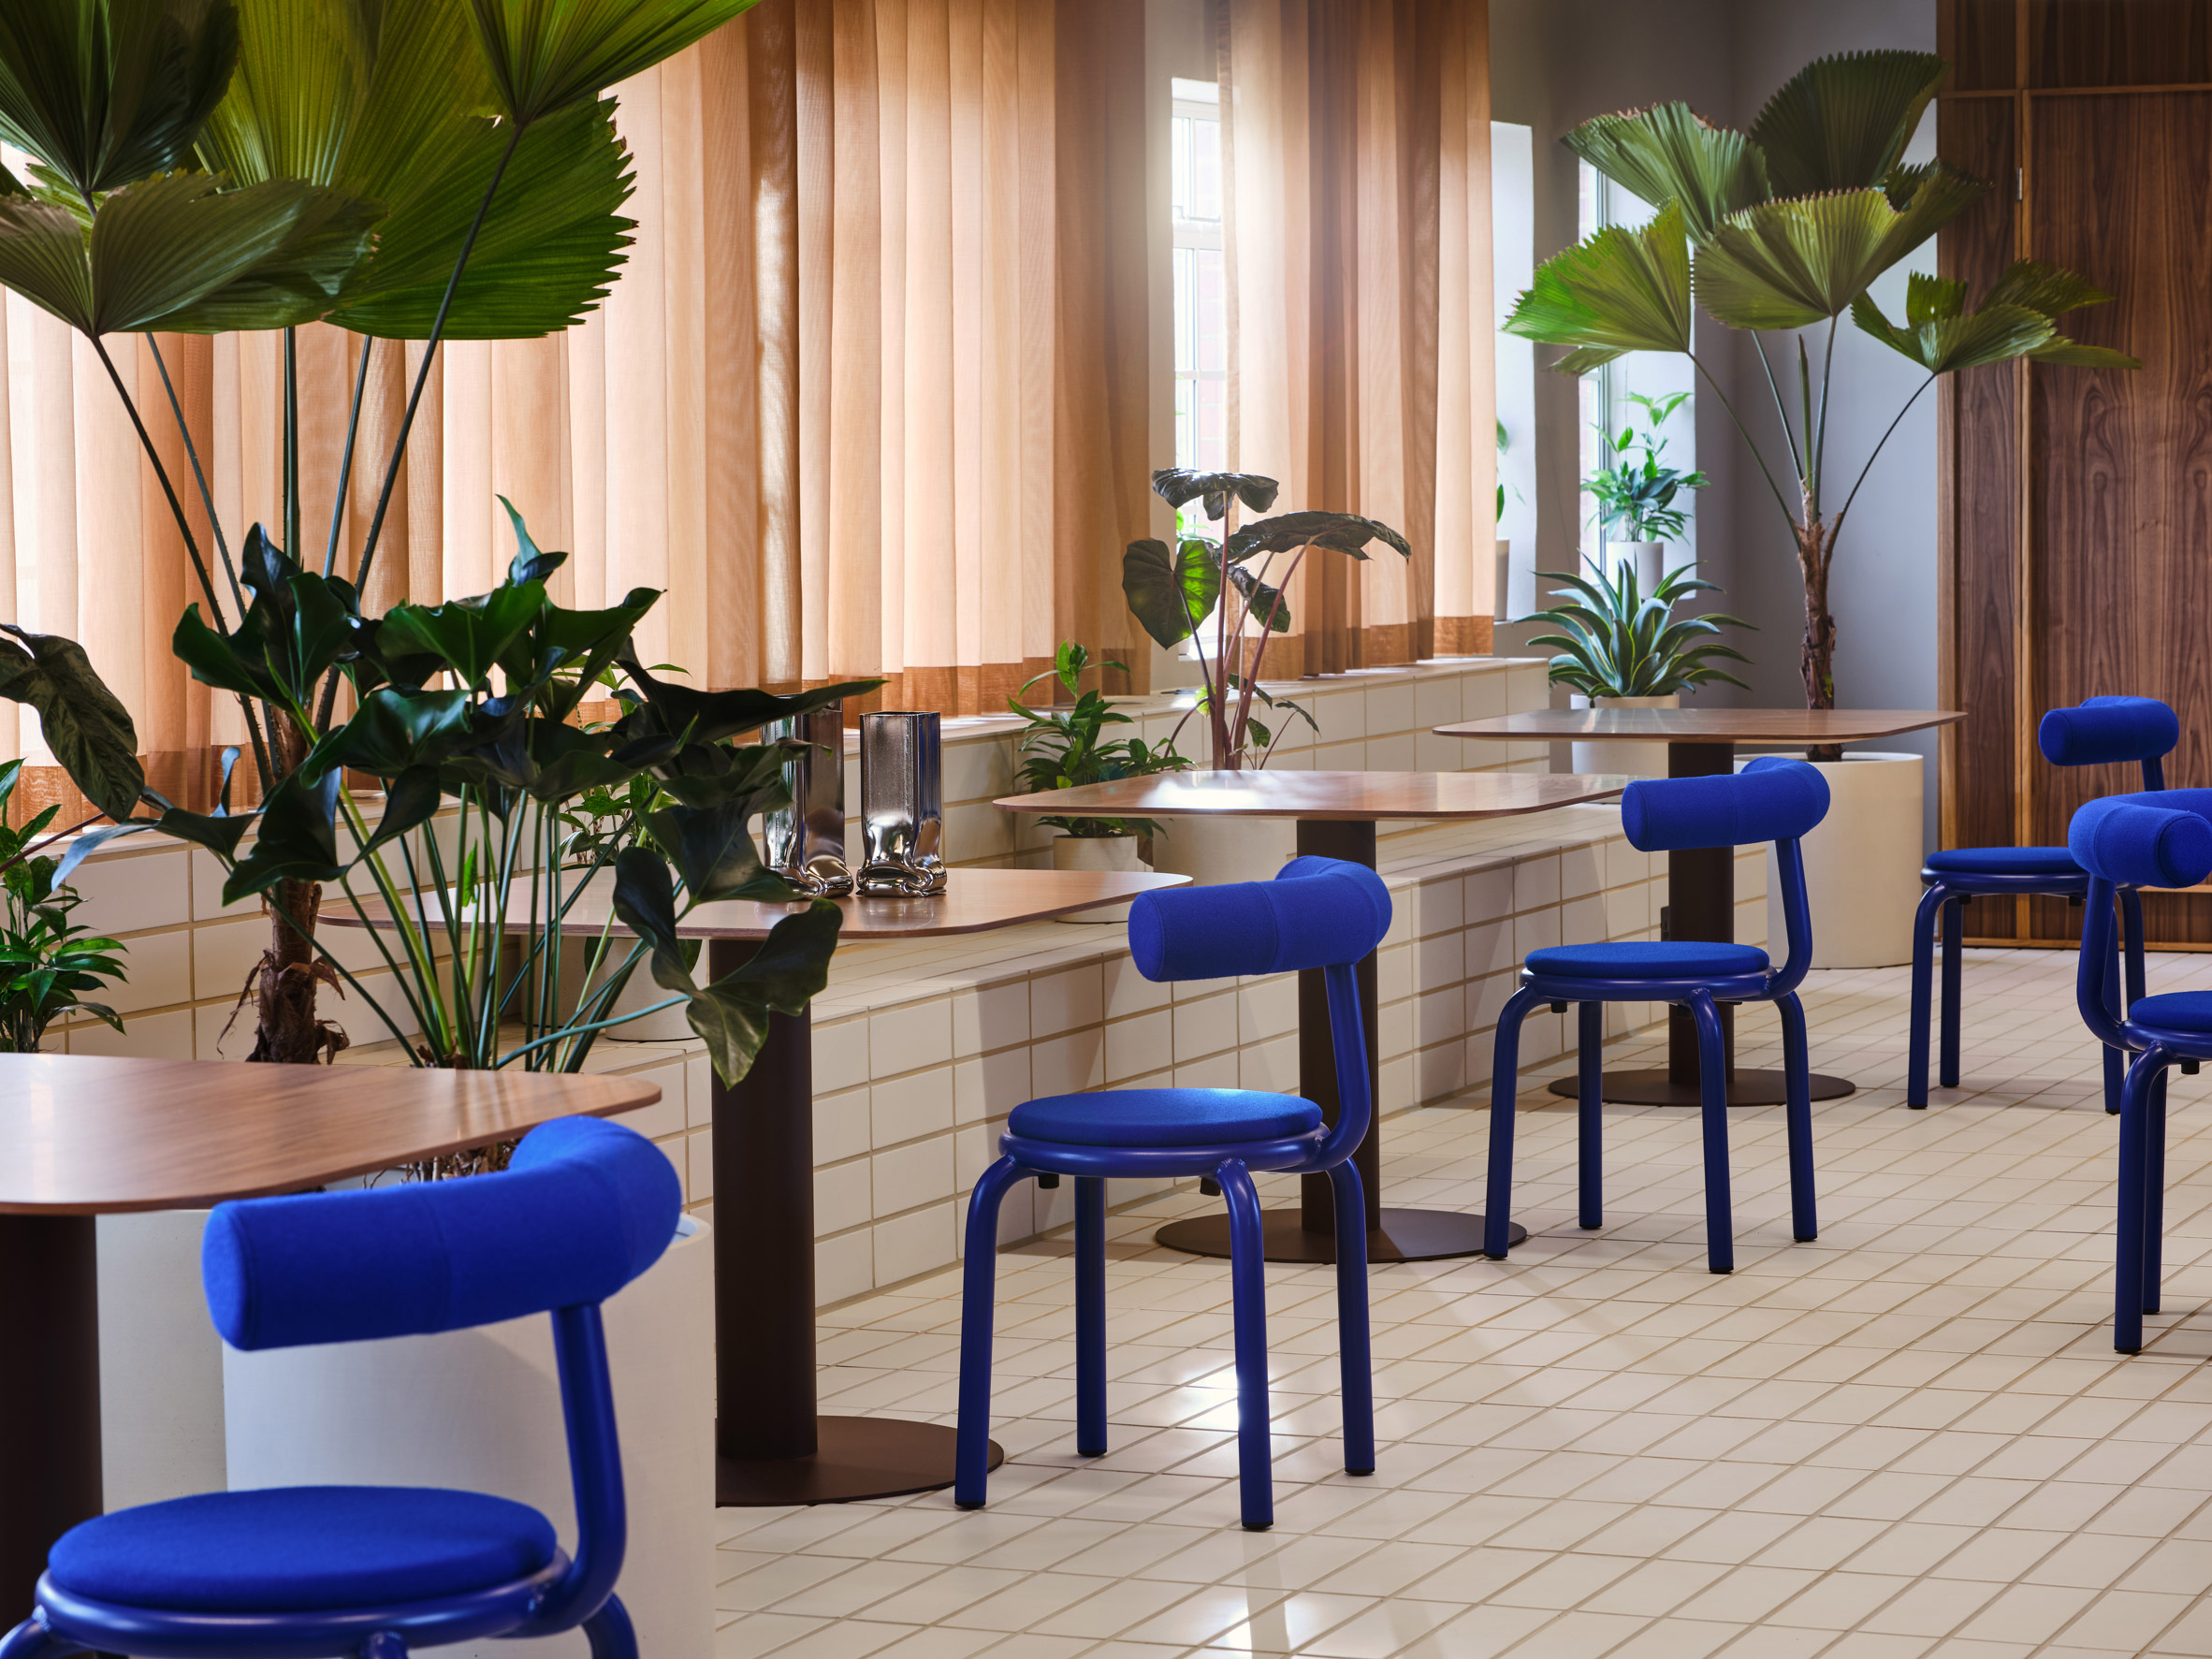 Tiled floor with klein blue chairs and plants in Douglas House